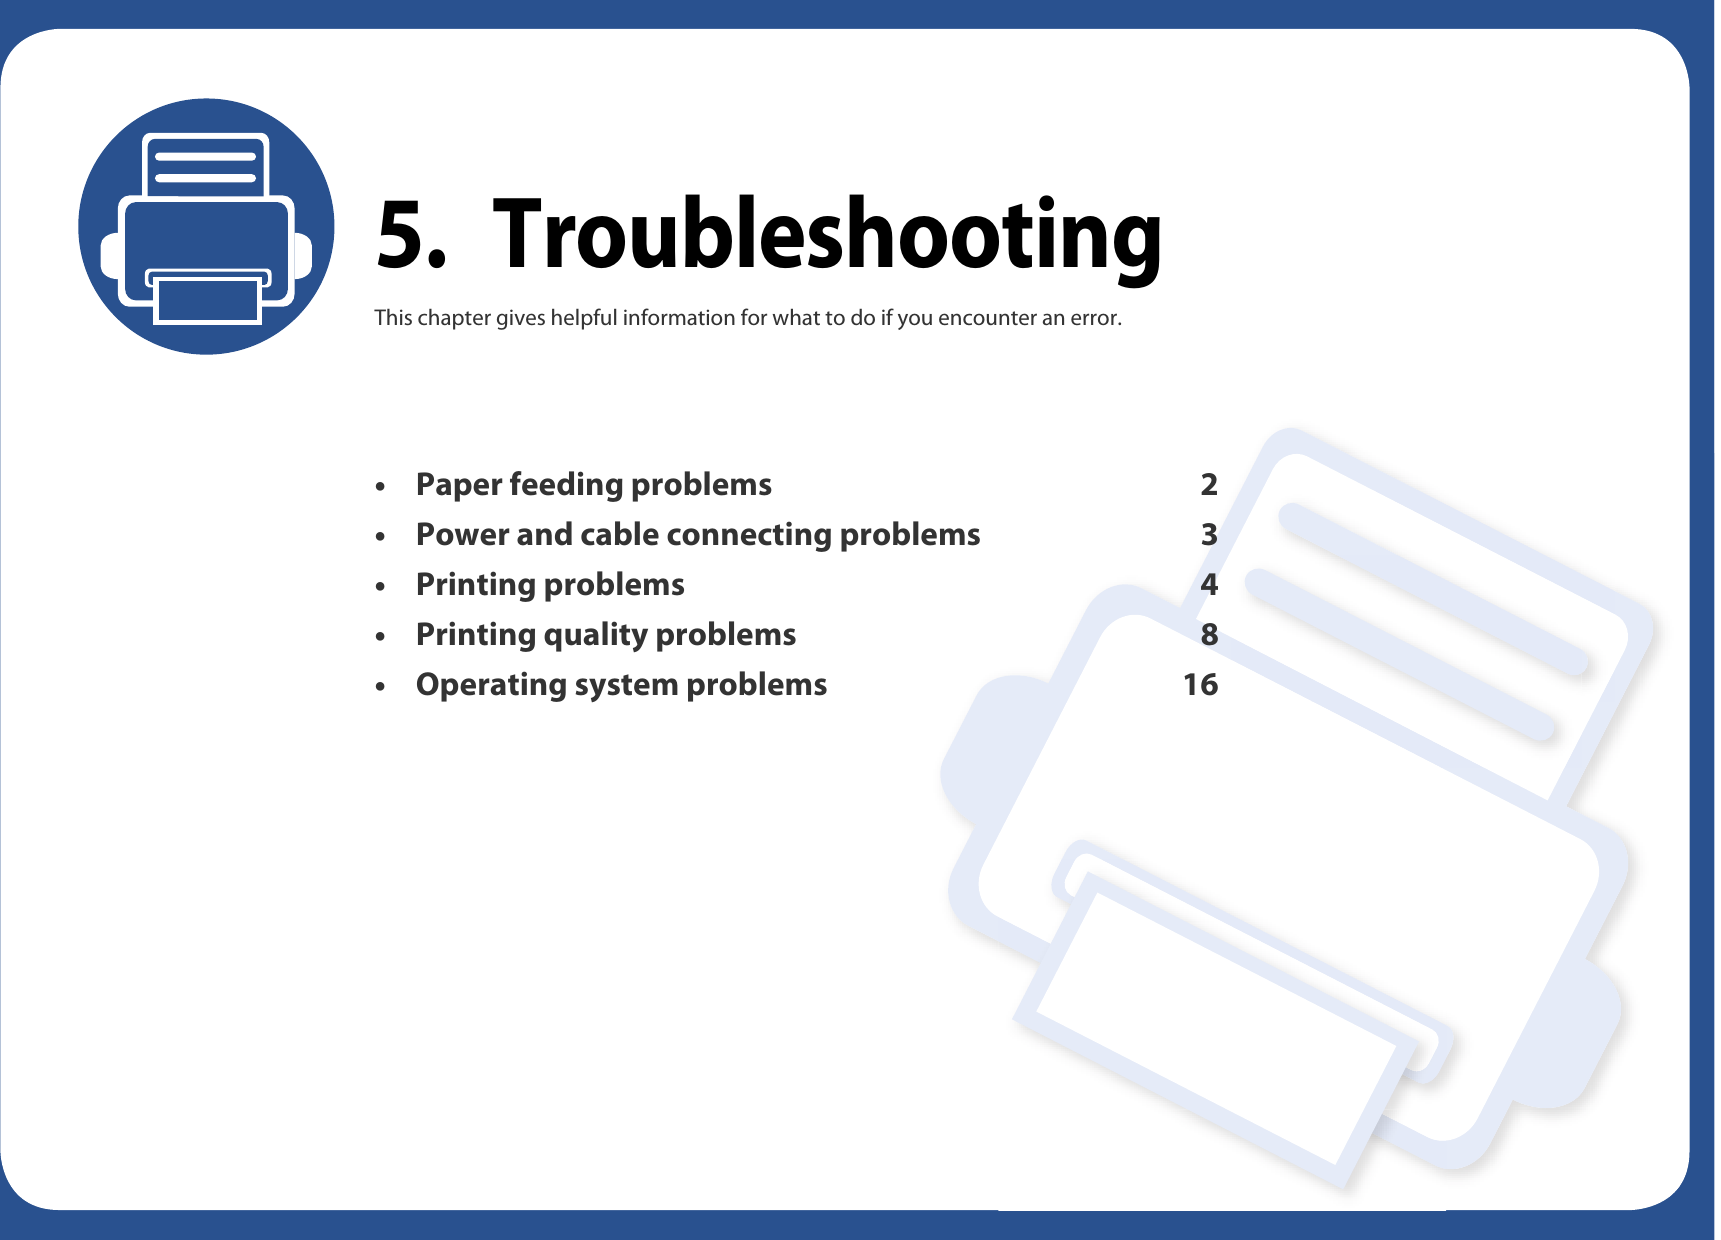 5. TroubleshootingThis chapter gives helpful information for what to do if you encounter an error.• Paper feeding problems 2• Power and cable connecting problems 3•Printing problems 4• Printing quality problems 8• Operating system problems 16